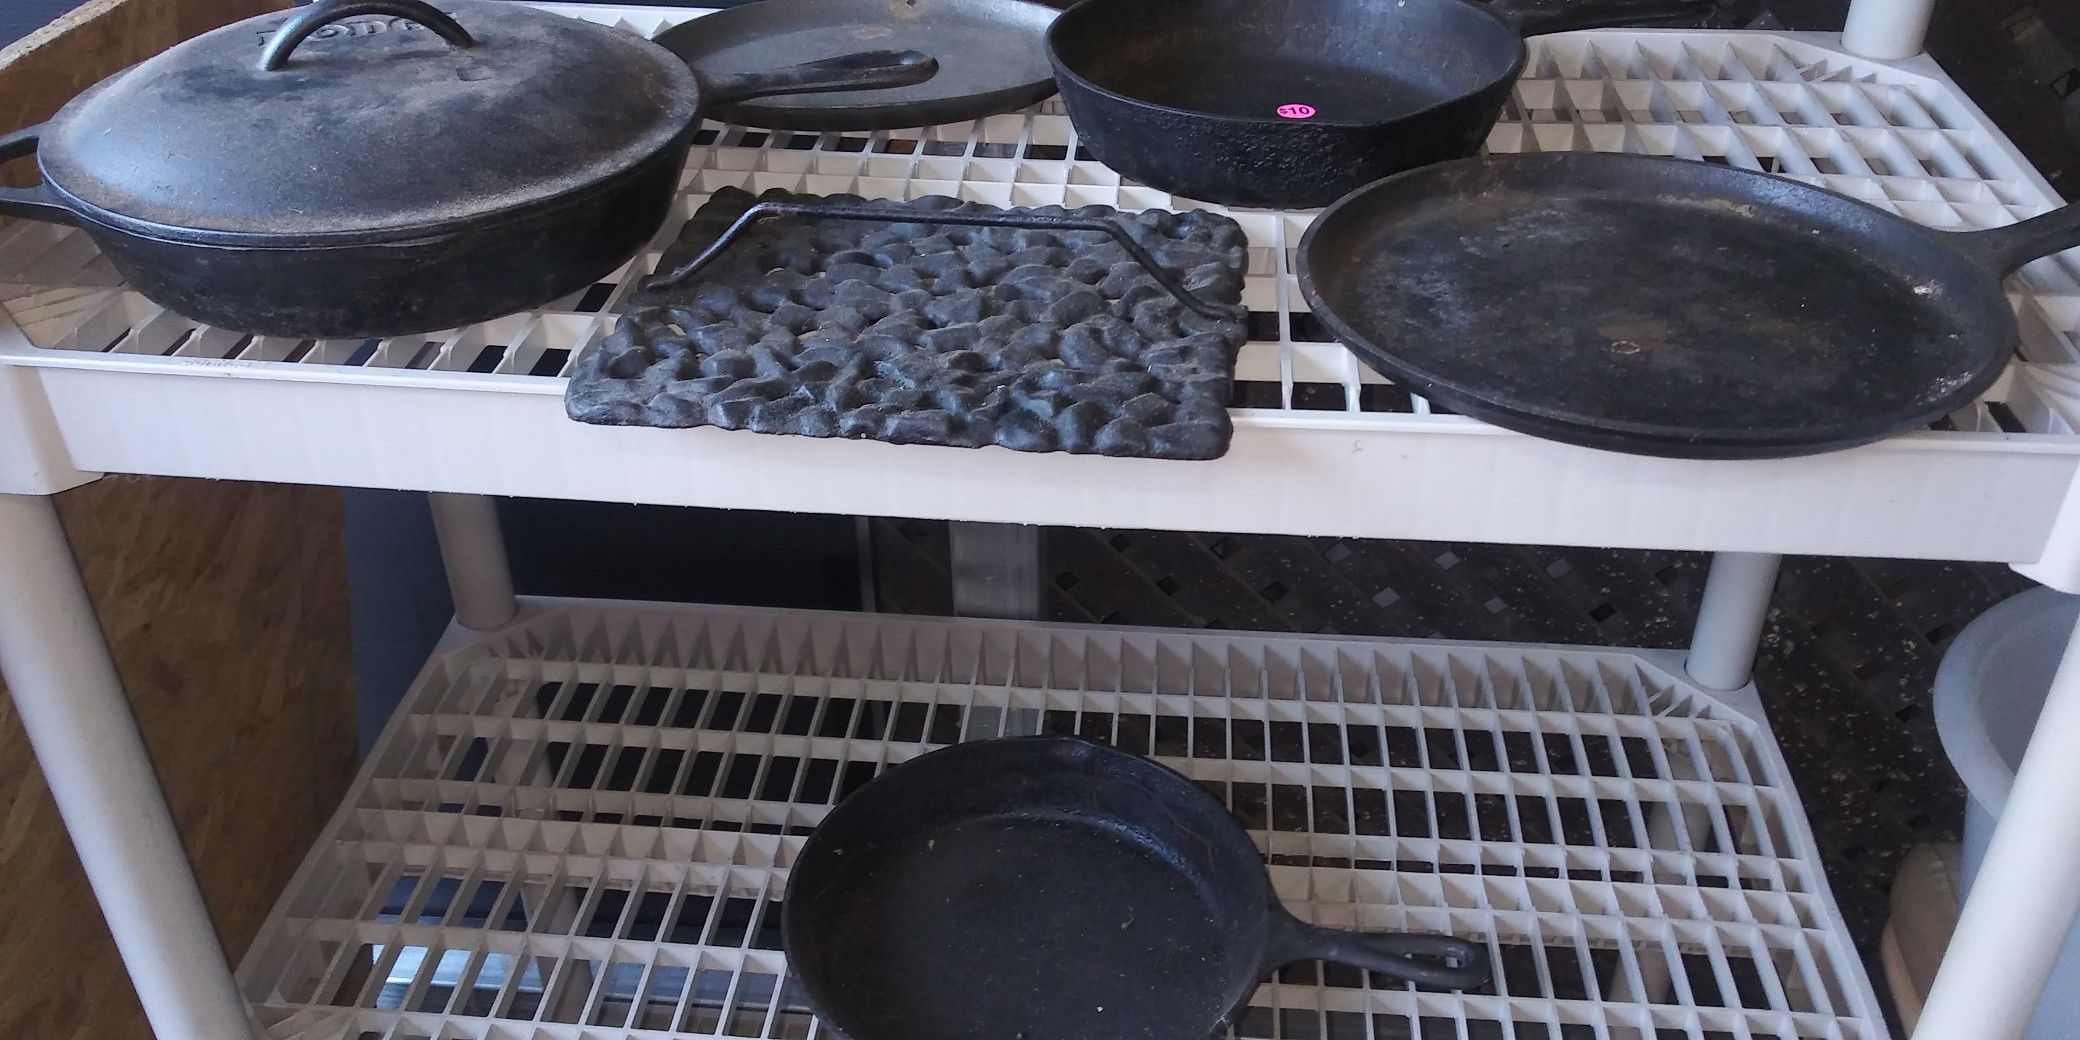 Cast iron caceroles. All for 35.00 FIRM